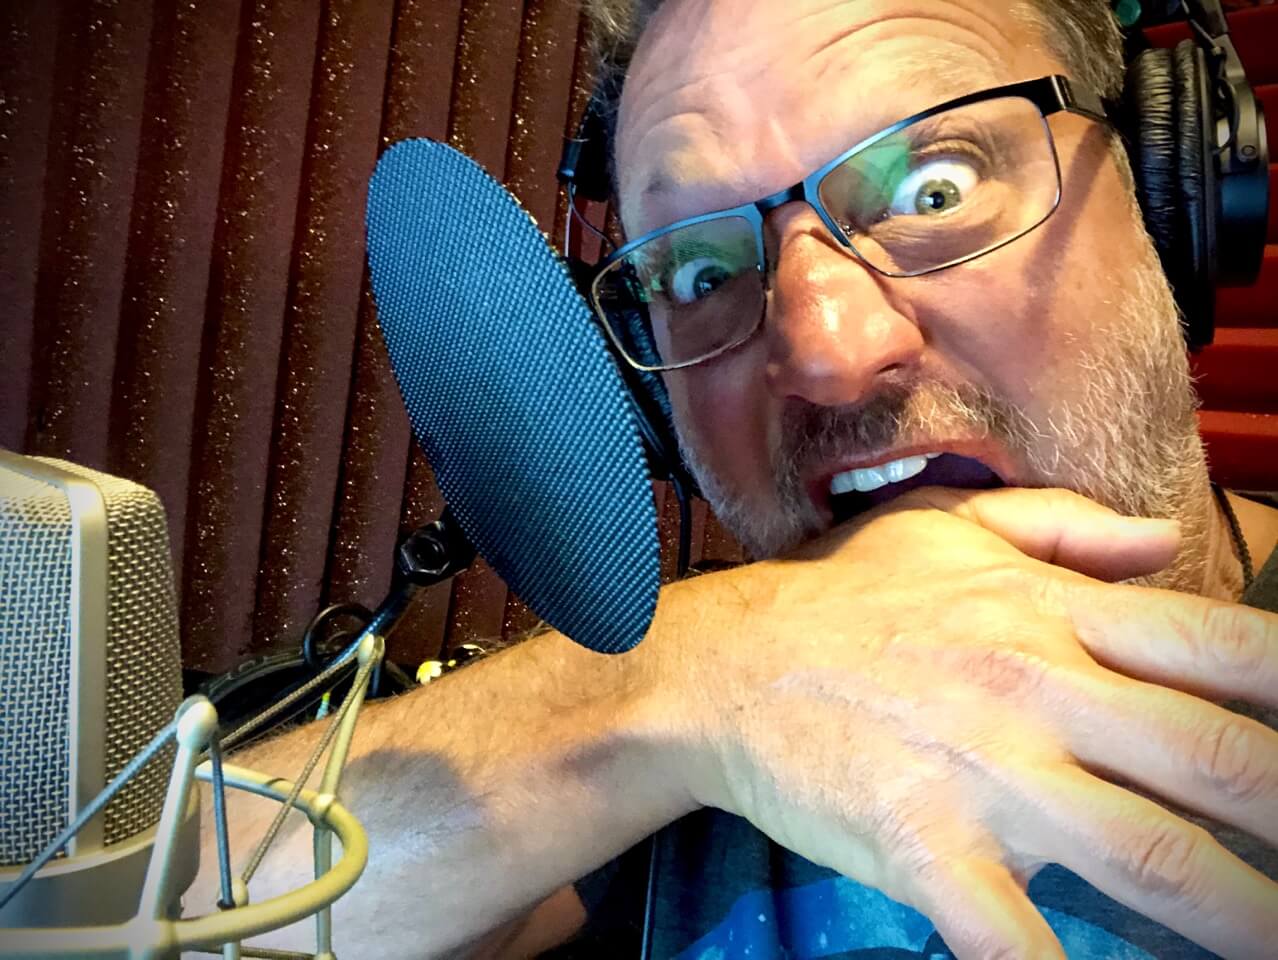 When Reality Bites- Image of Steve Blum biting his hand in the booth